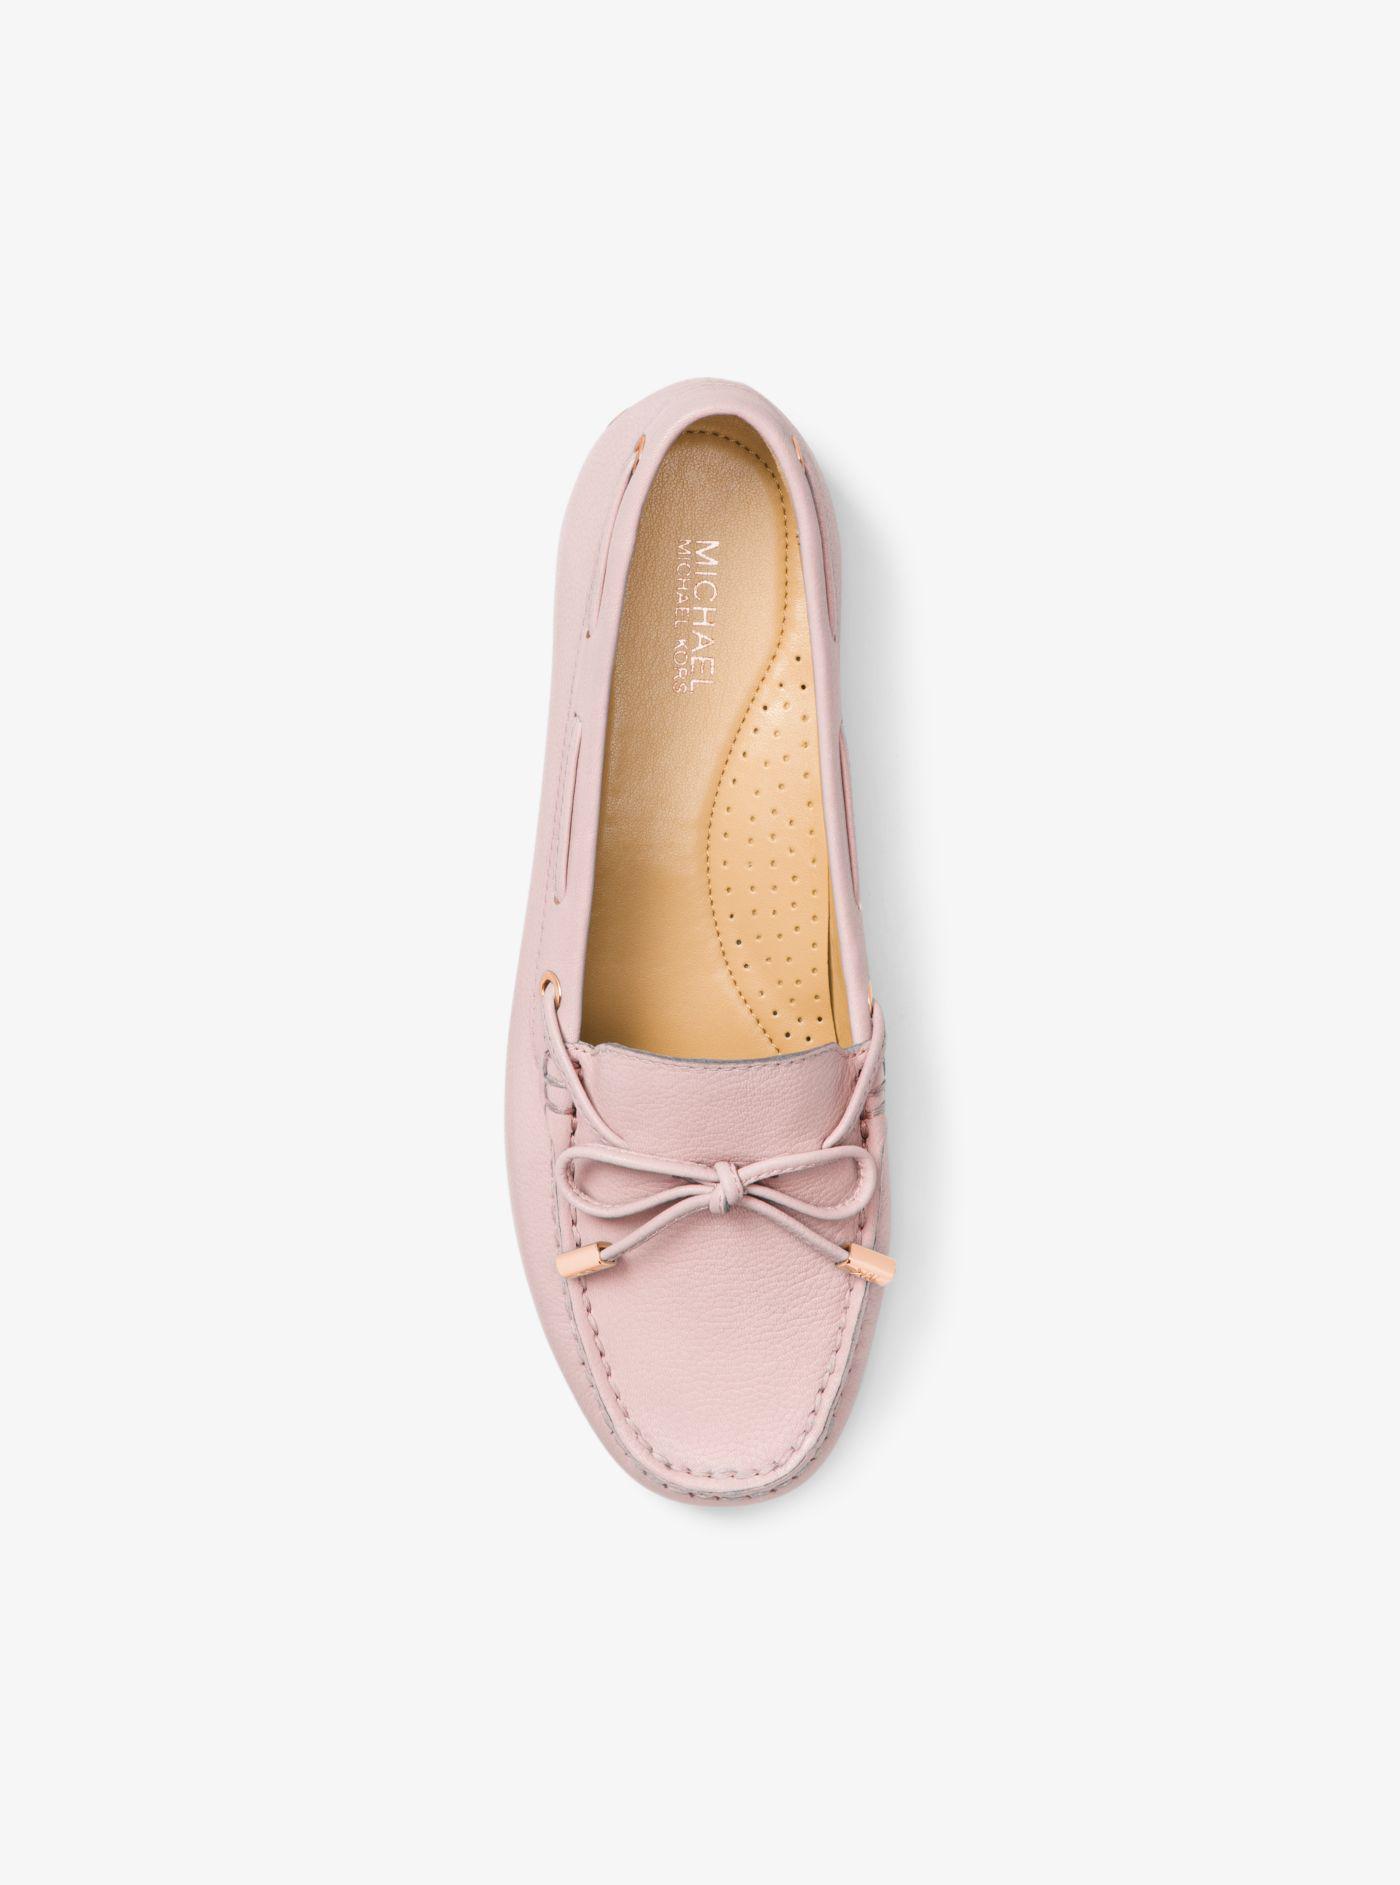 Michael Kors Sutton Leather Moccasin in Soft Pink (Pink) - Lyst